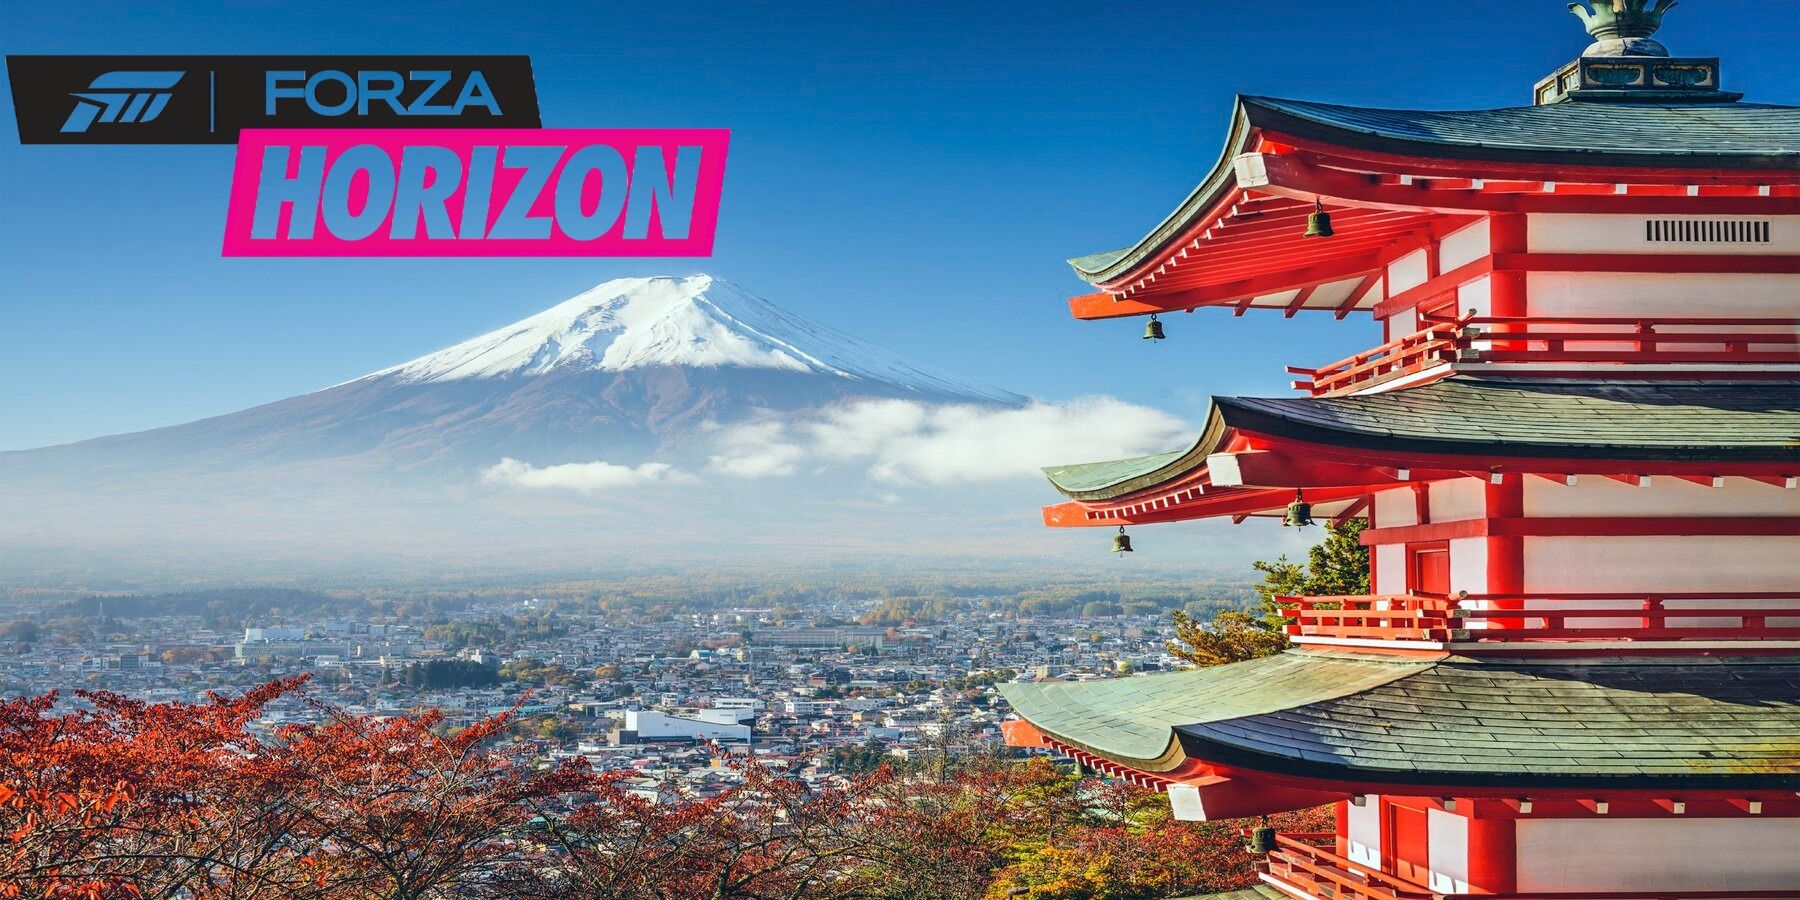 Forza Fans Won't Give Up On Japan As The Next Horizon Location